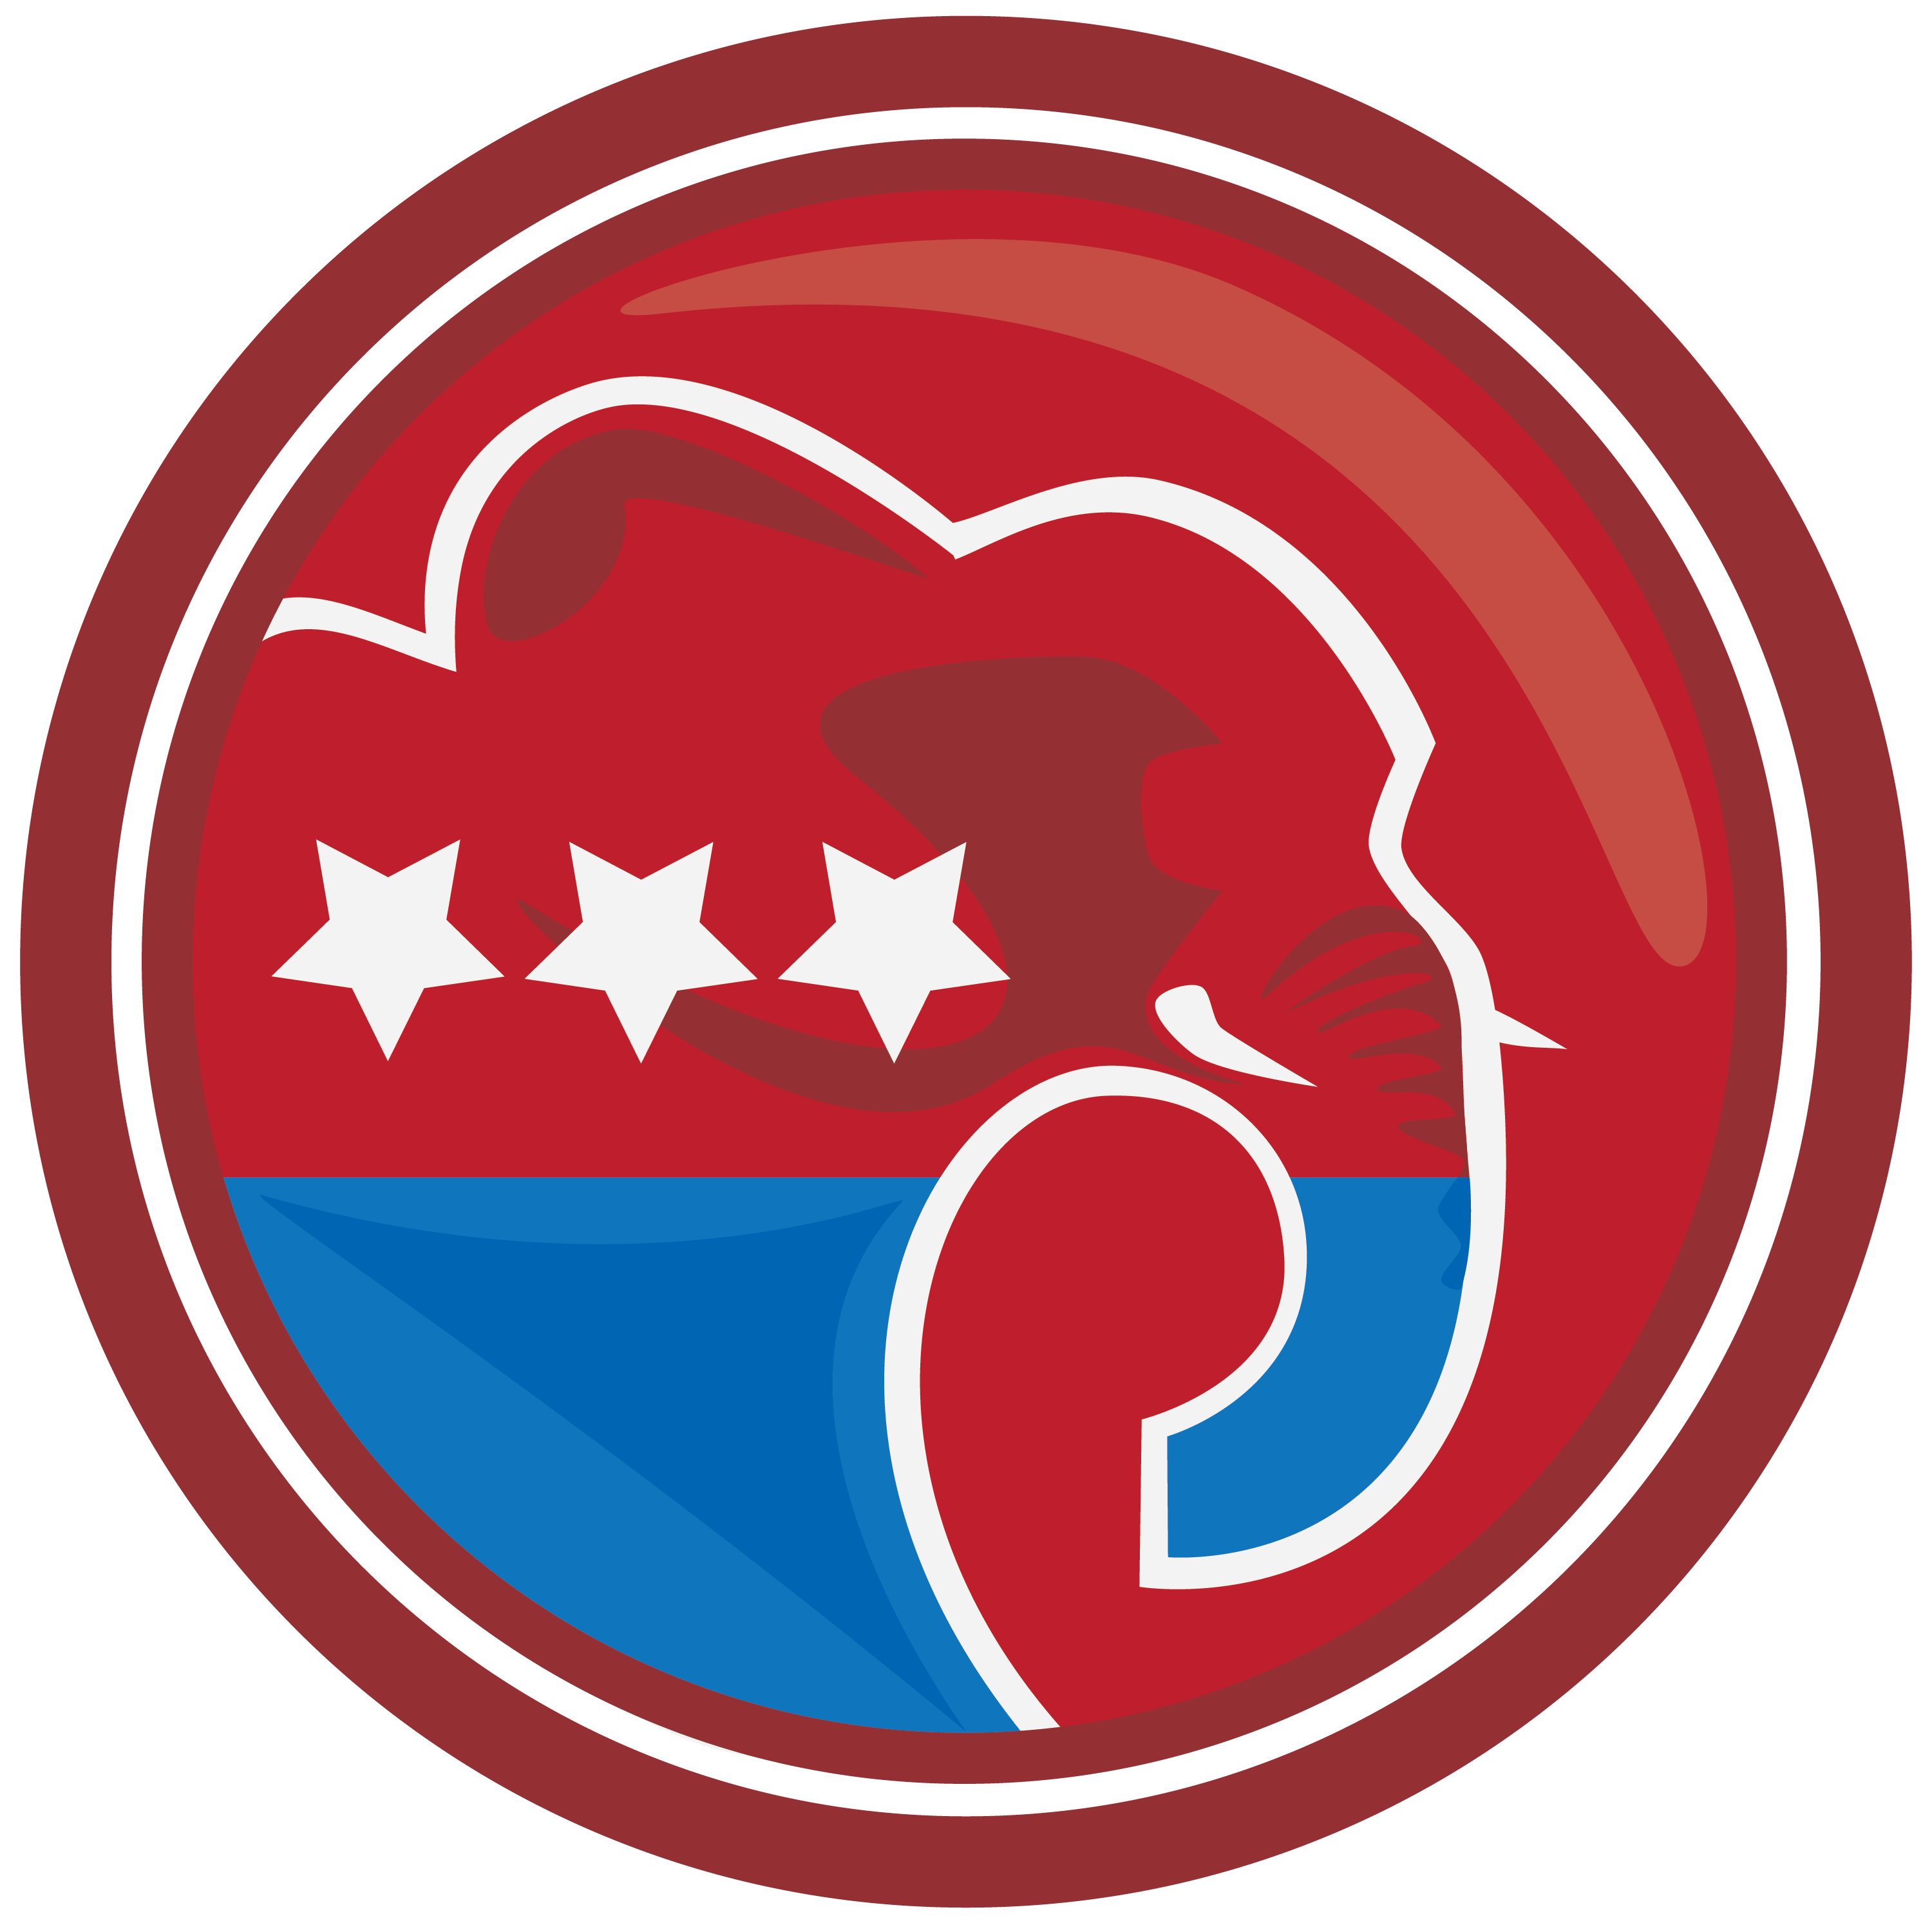 GOP's Elephant and Democratic Donkey Get a Makeover | Kelley